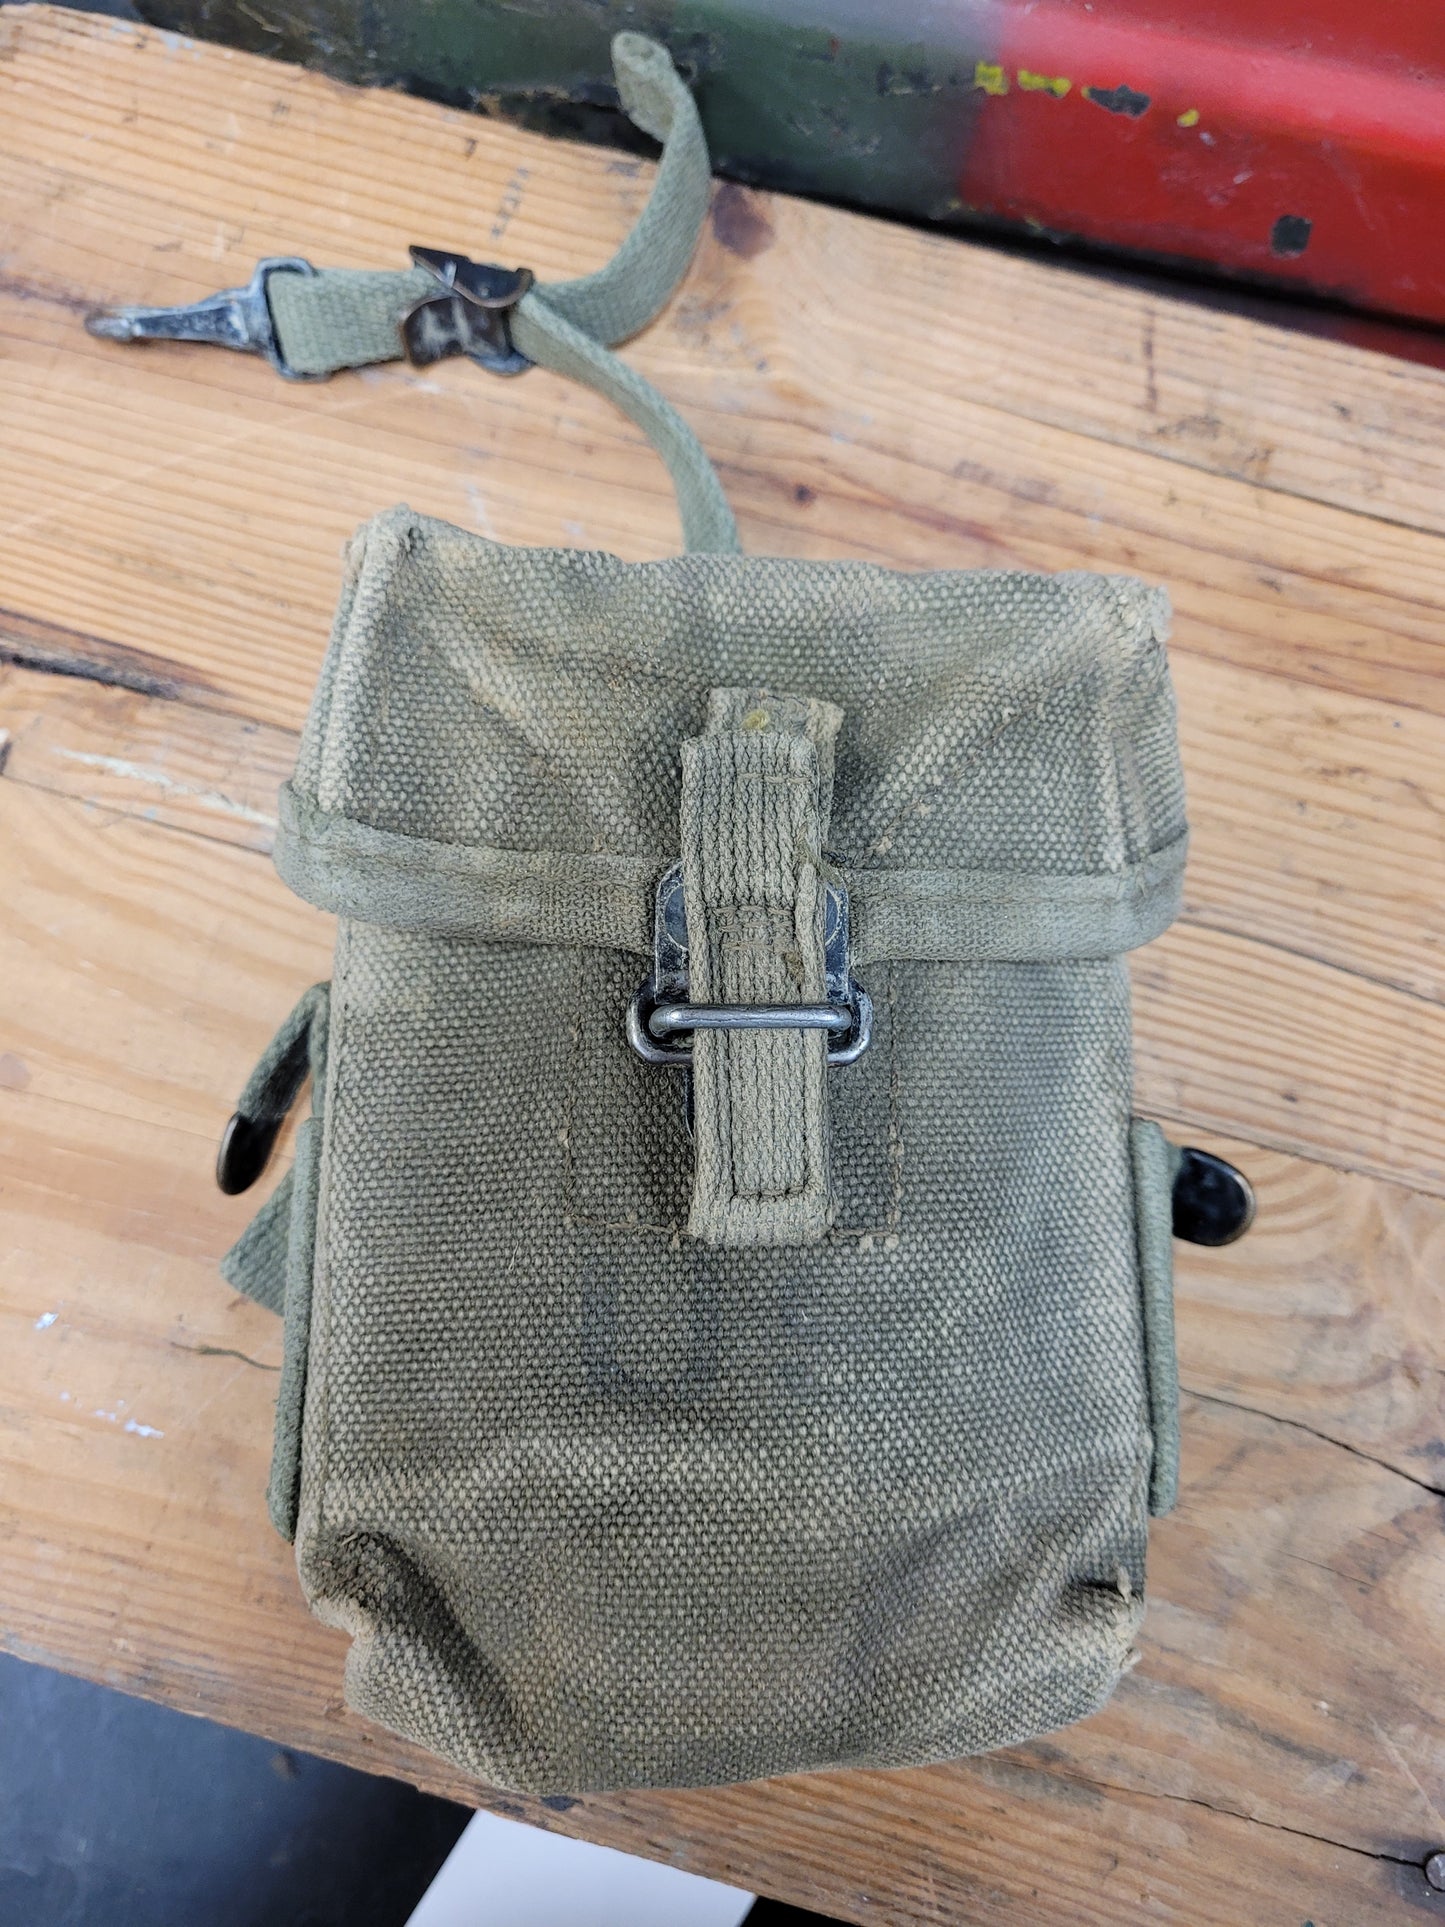 M56 Ammo Pouch